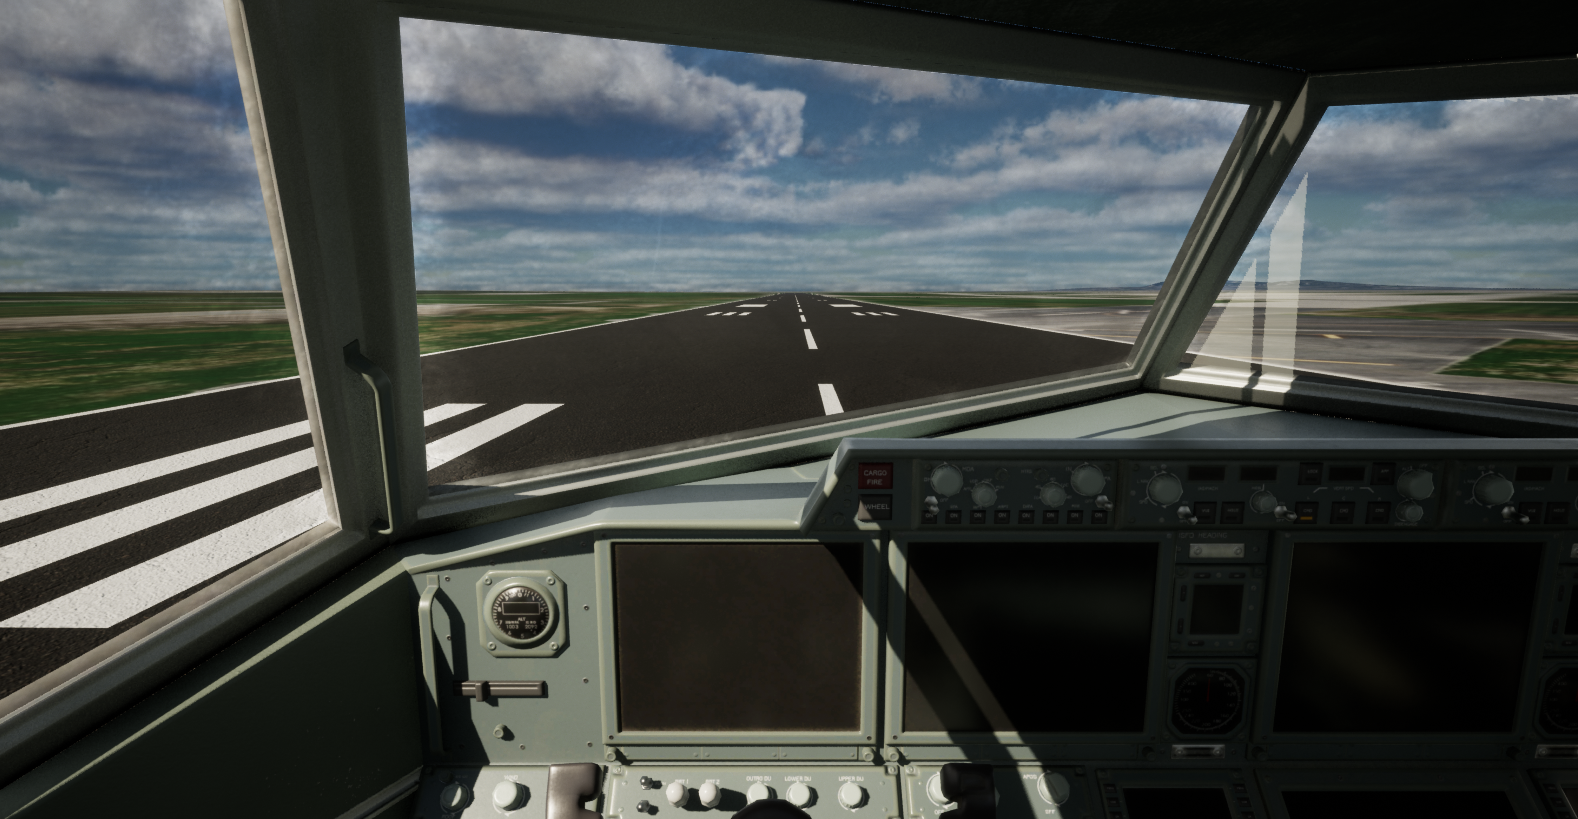 Microsoft Flight Simulator update could lead to a virtual Space Shuttle -  Polygon